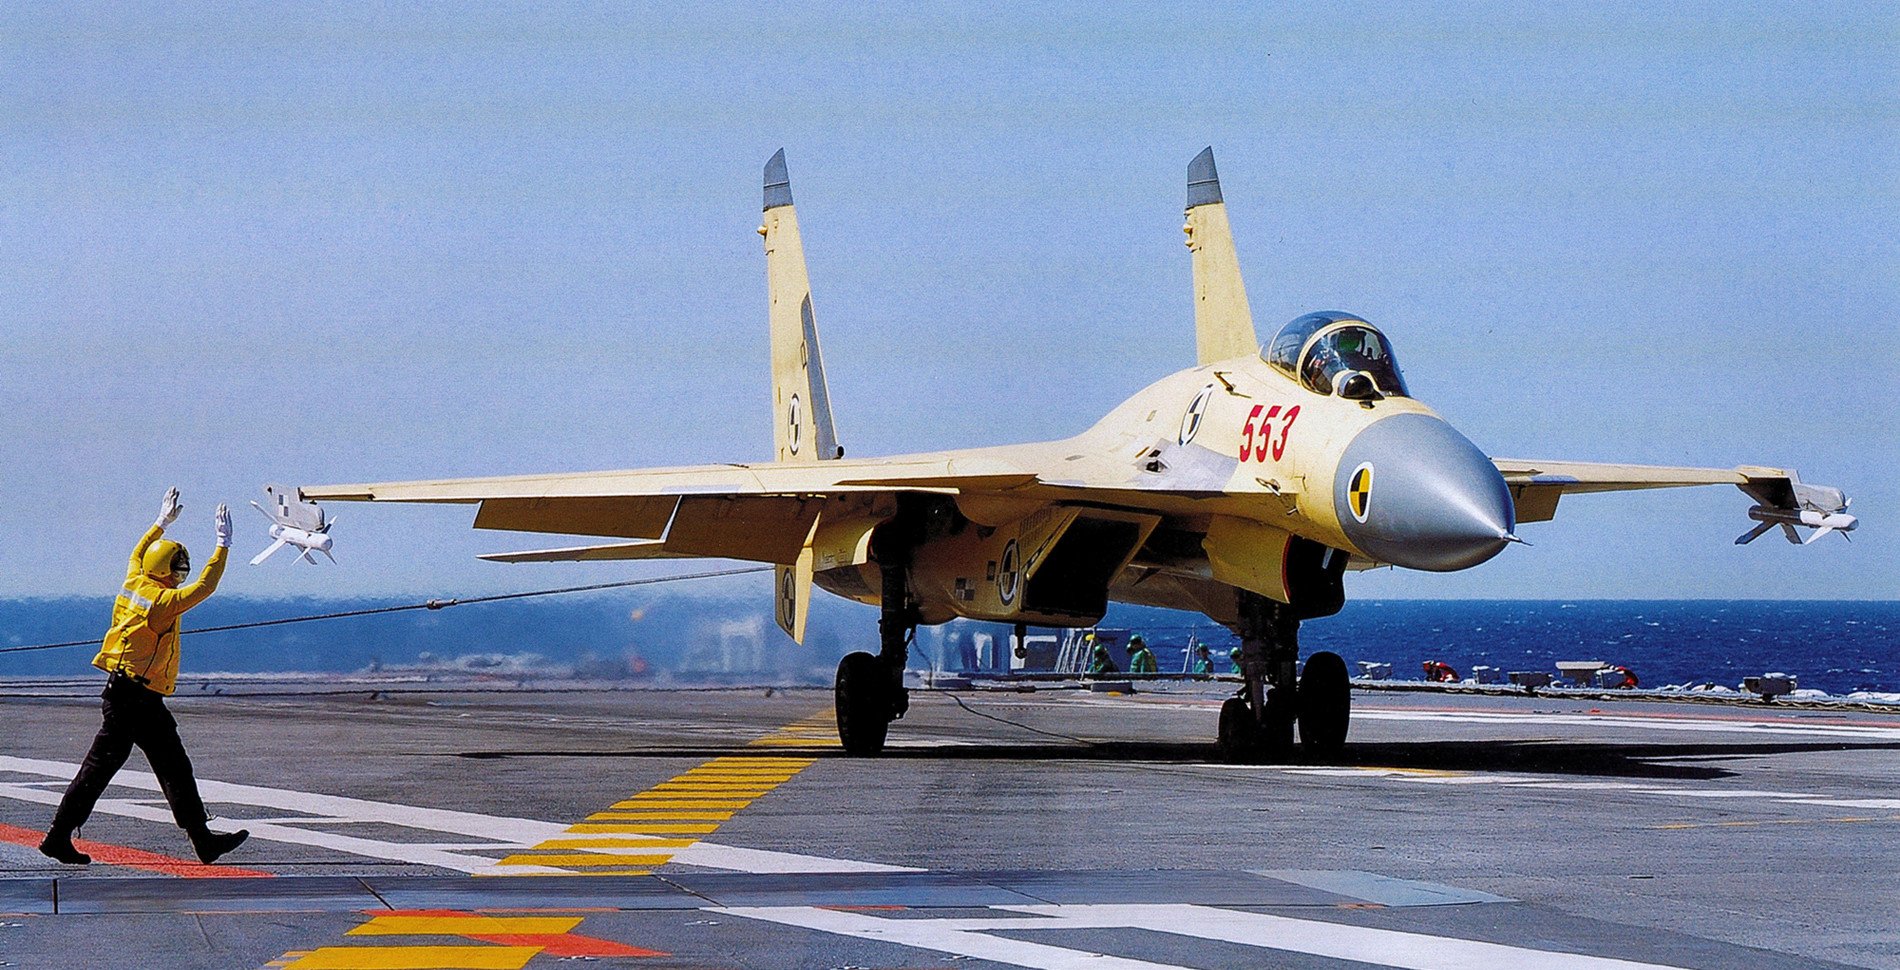 Shenyeng J-15 Flying Shark on the Chinese aircraft carrier Liaoning. PLAN Photo 